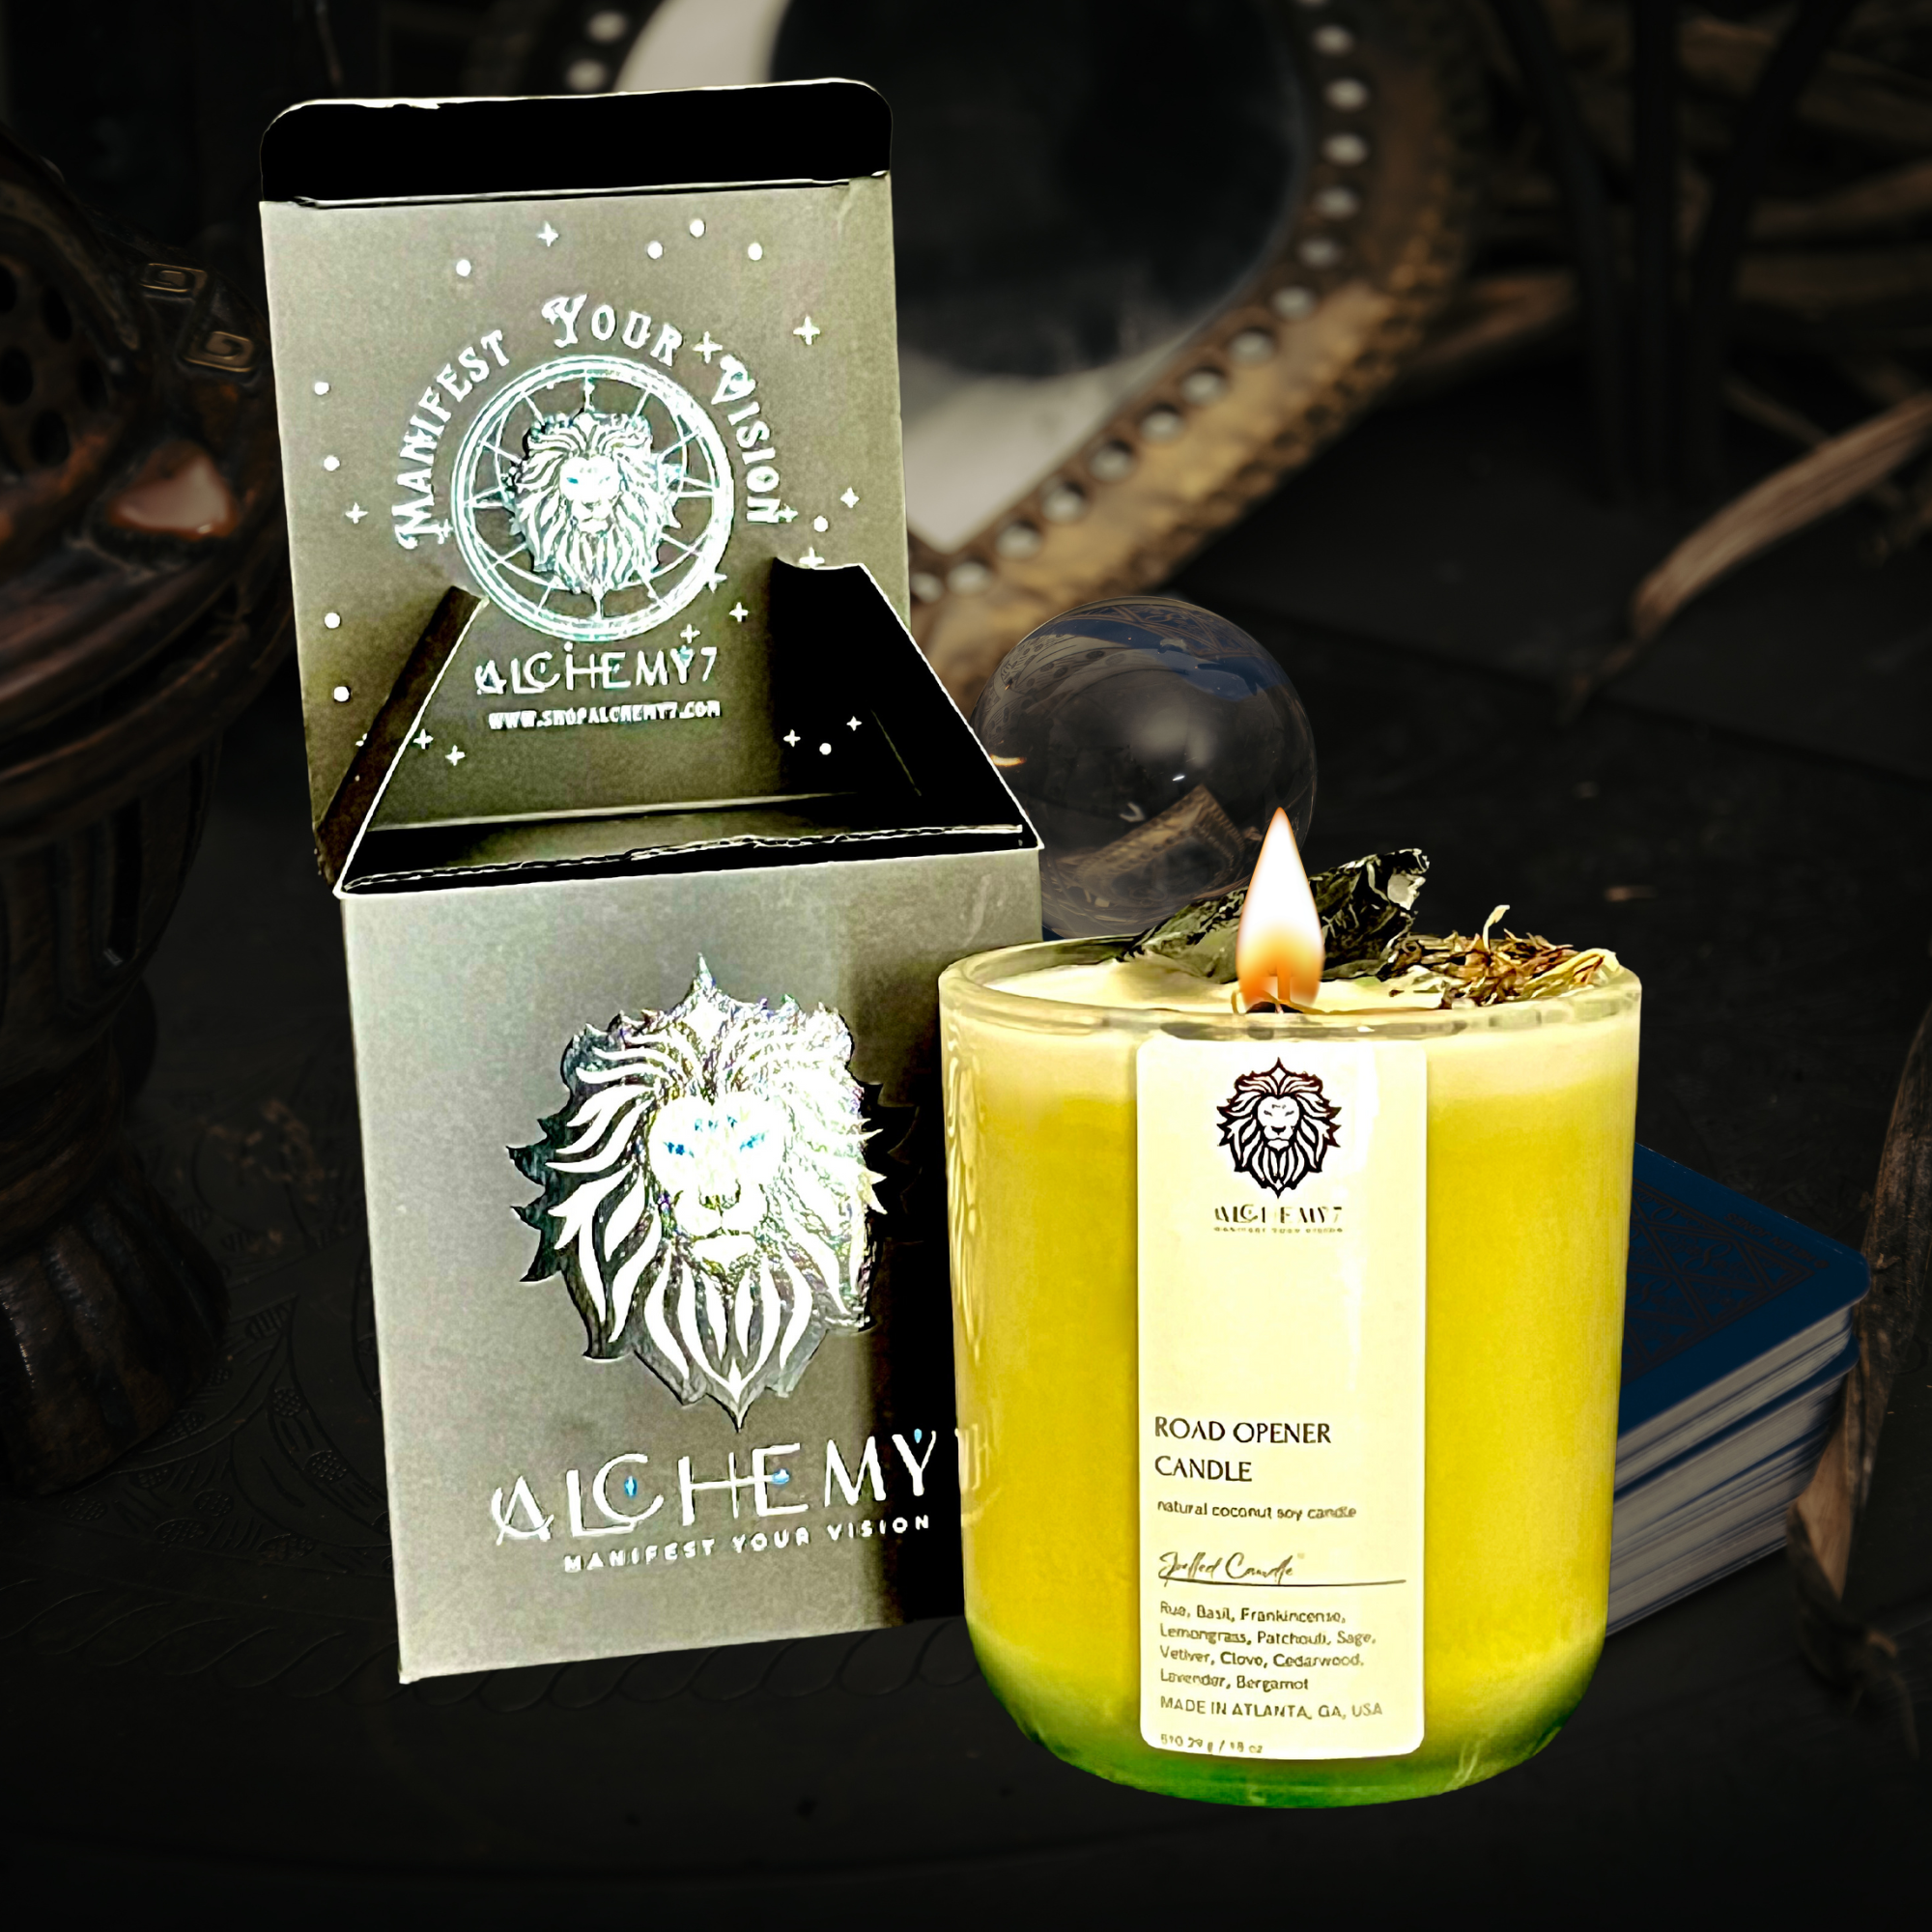 Alchemy7 | Road Opener Spell Candle - Clear the Path to Prosperity - Abre Camino